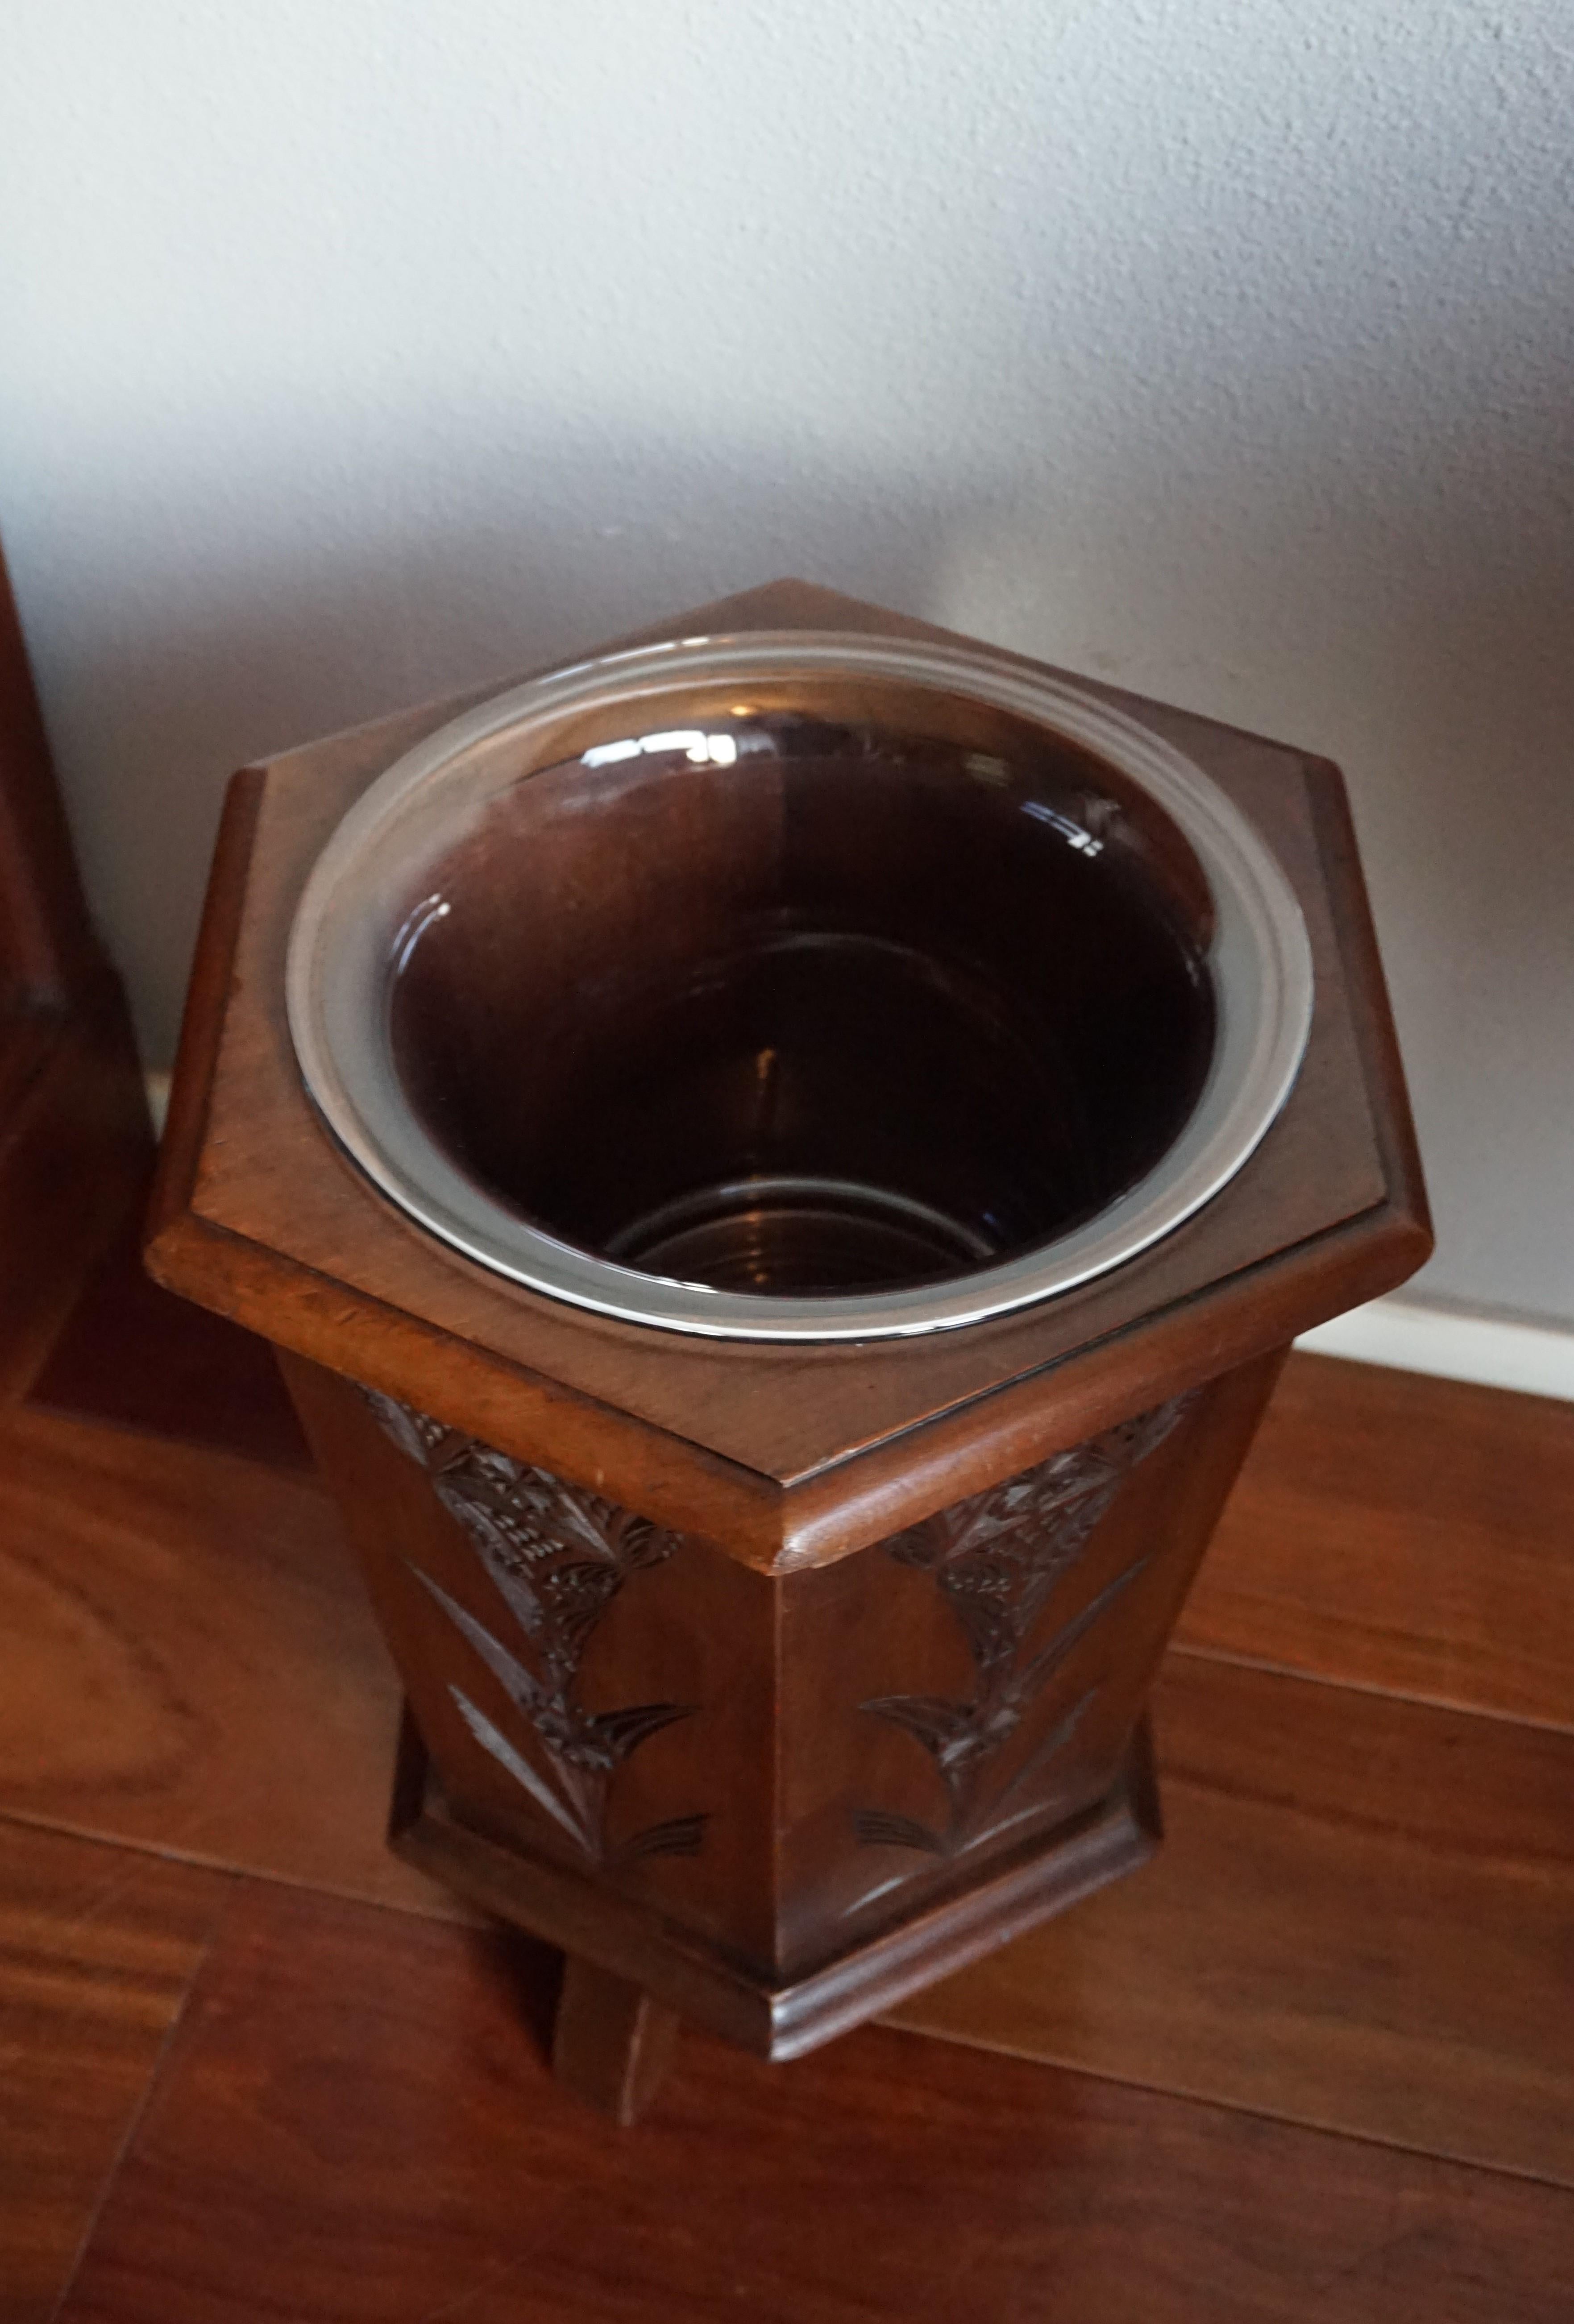 Handcrafted and very stylish home accessory from the early 1900s.

For a stylish, beautiful and practical antique from the Arts & Crafts era there is always room in your home. This marvelous and all handcrafted planter or bucket on its tripod base